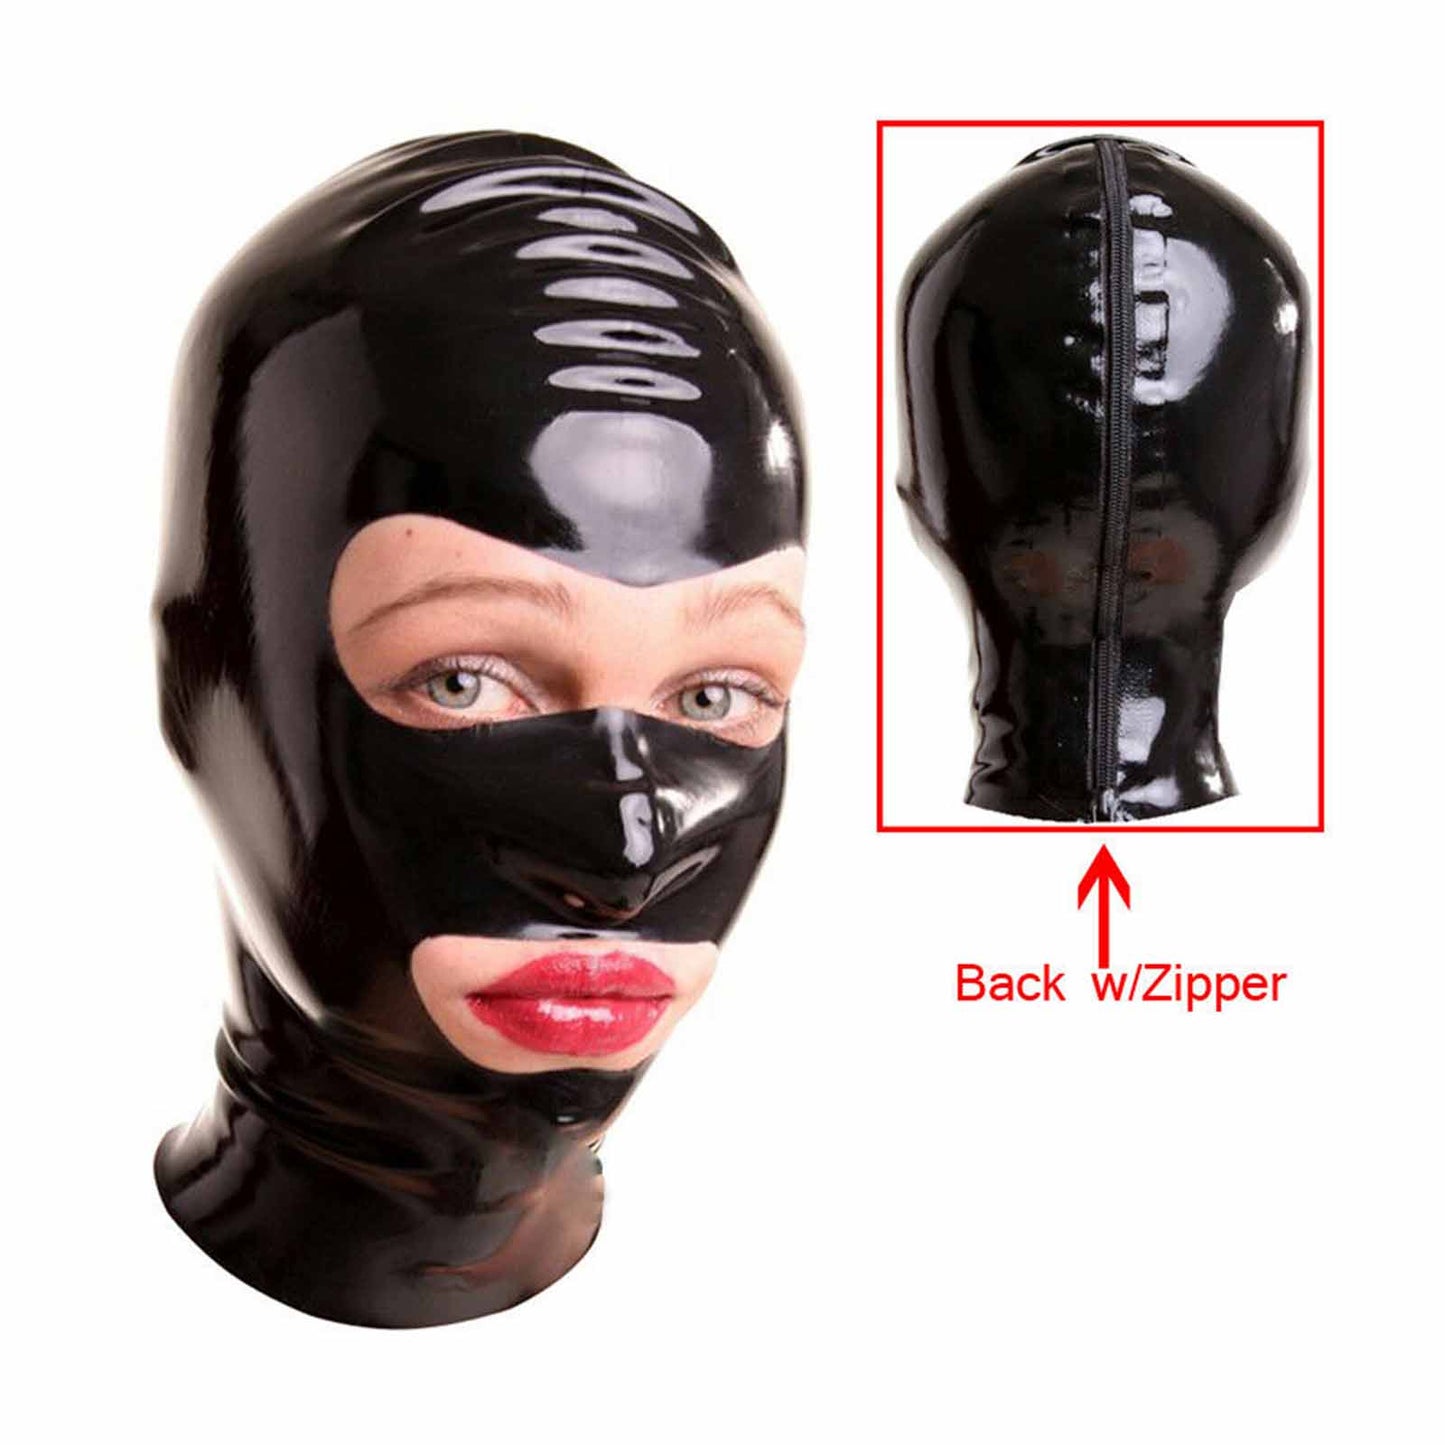 MONNIK Black Latex Hood Rubber Unisex Mask Open Eyes&Mouth for Fetish Catsuit Party Halloween Costume